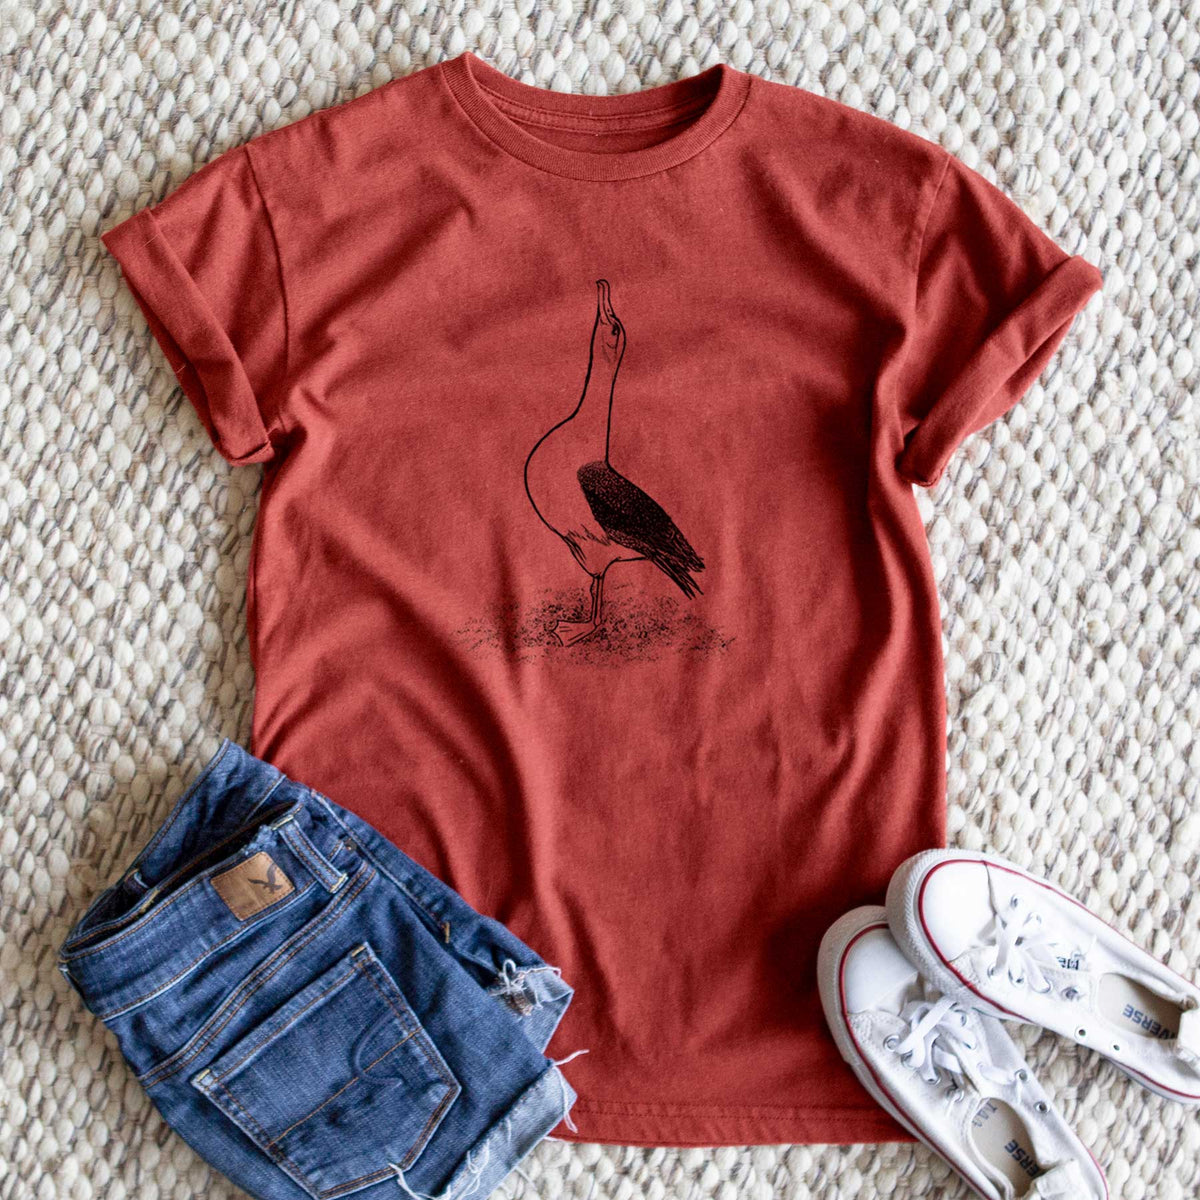 Diomedea exulans - Wandering Albatross - Unisex Recycled Eco Tee  - CLOSEOUT - FINAL SALE